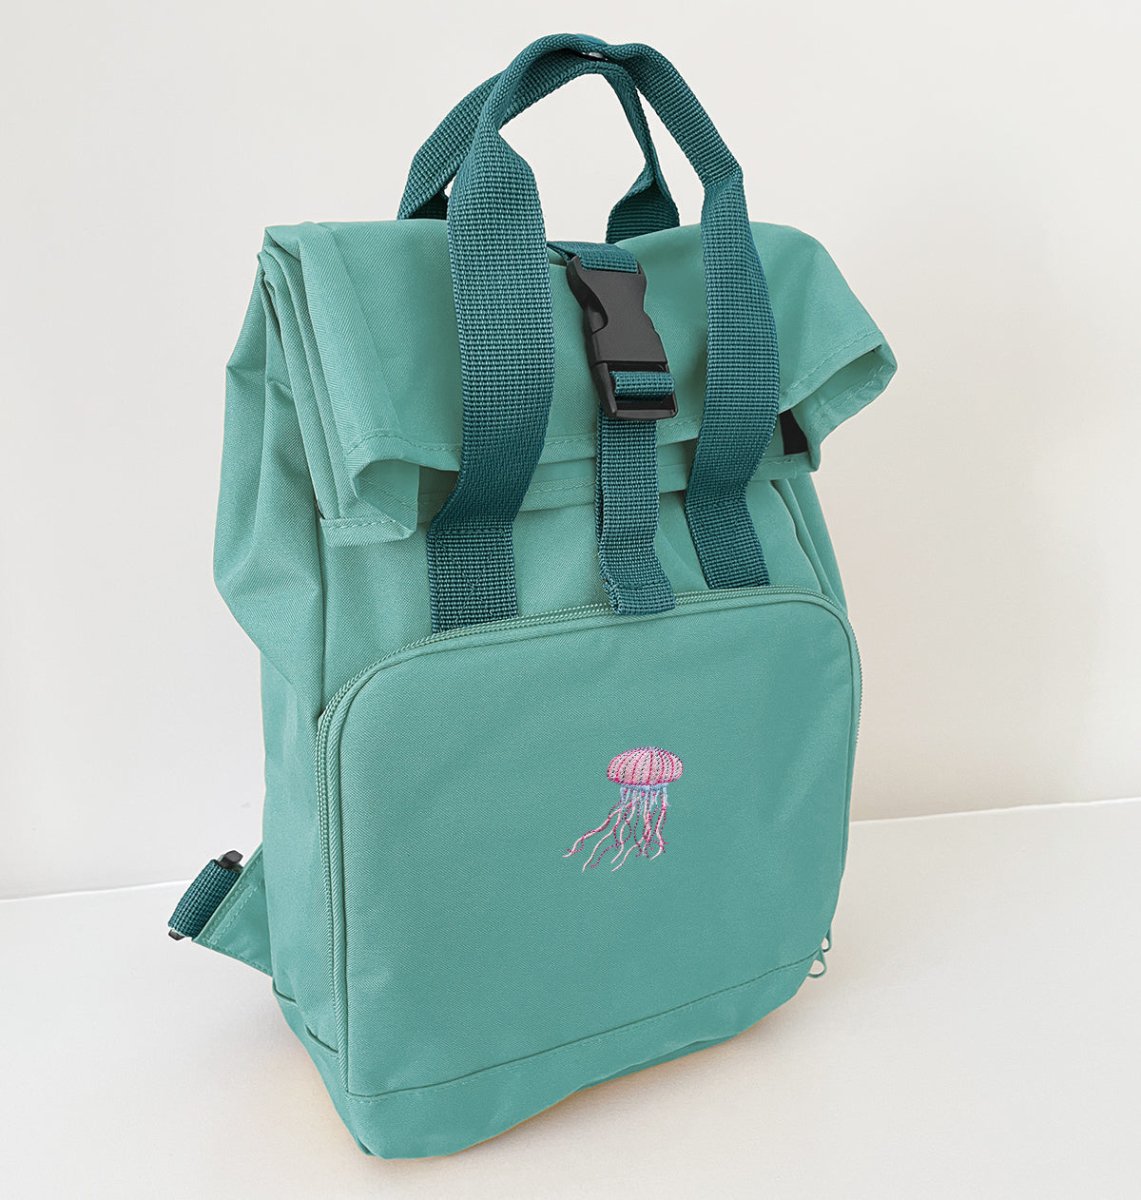 Jellyfish Mini Roll-top Recycled Backpack